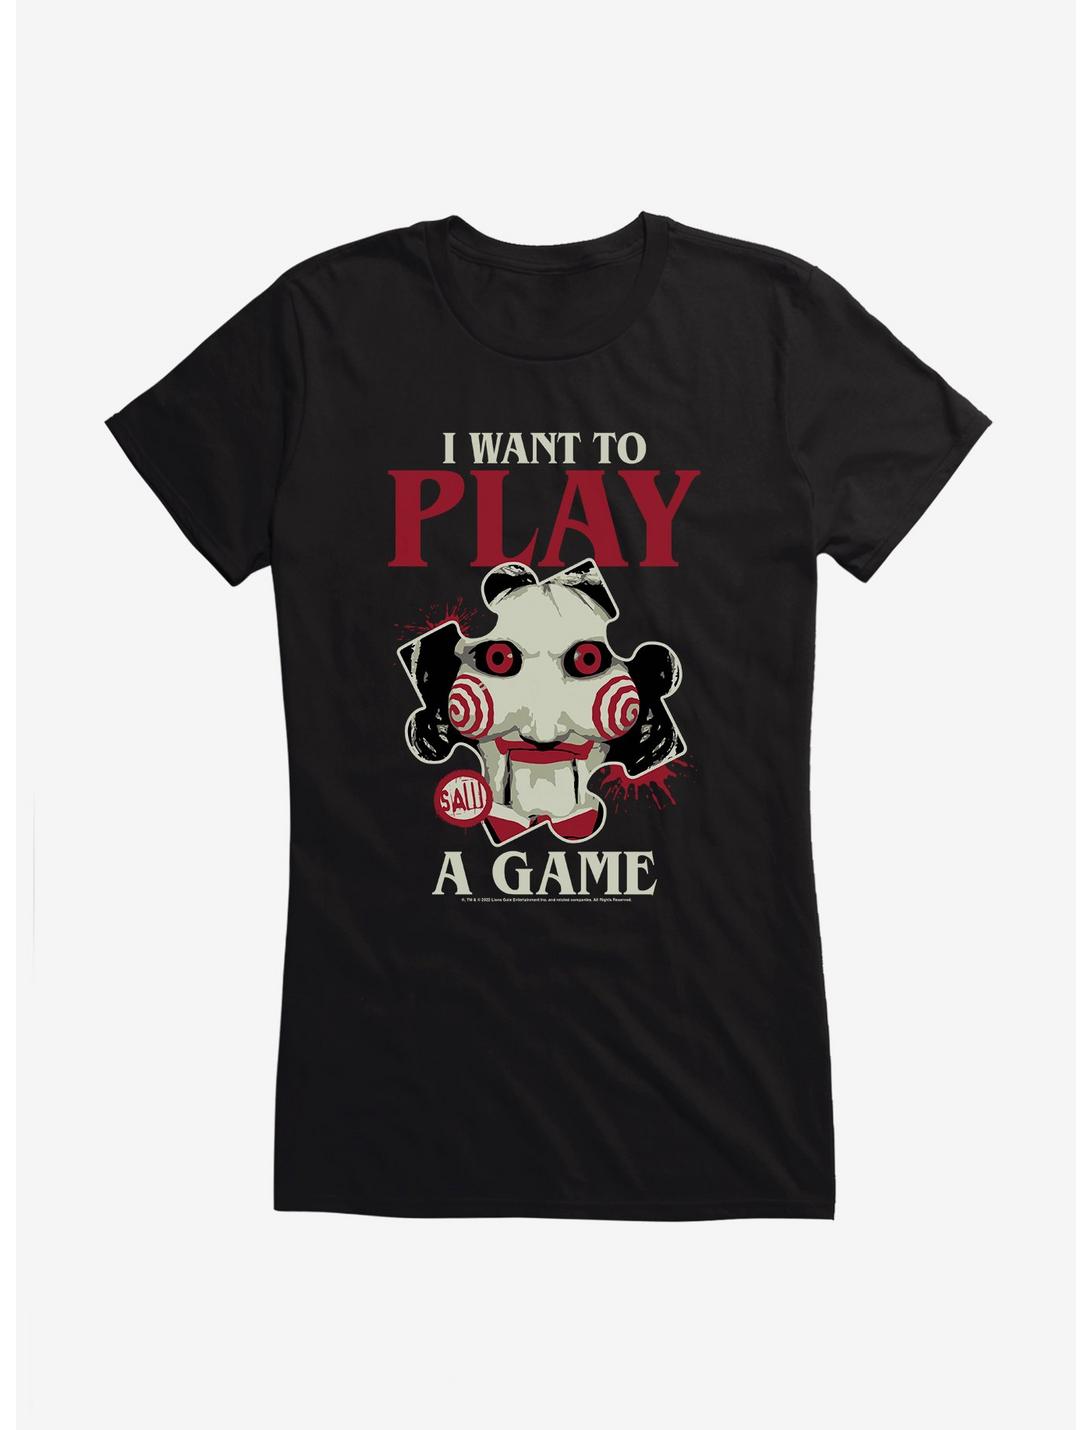 Saw I Want To Play A Game Girls T-Shirt, BLACK, hi-res